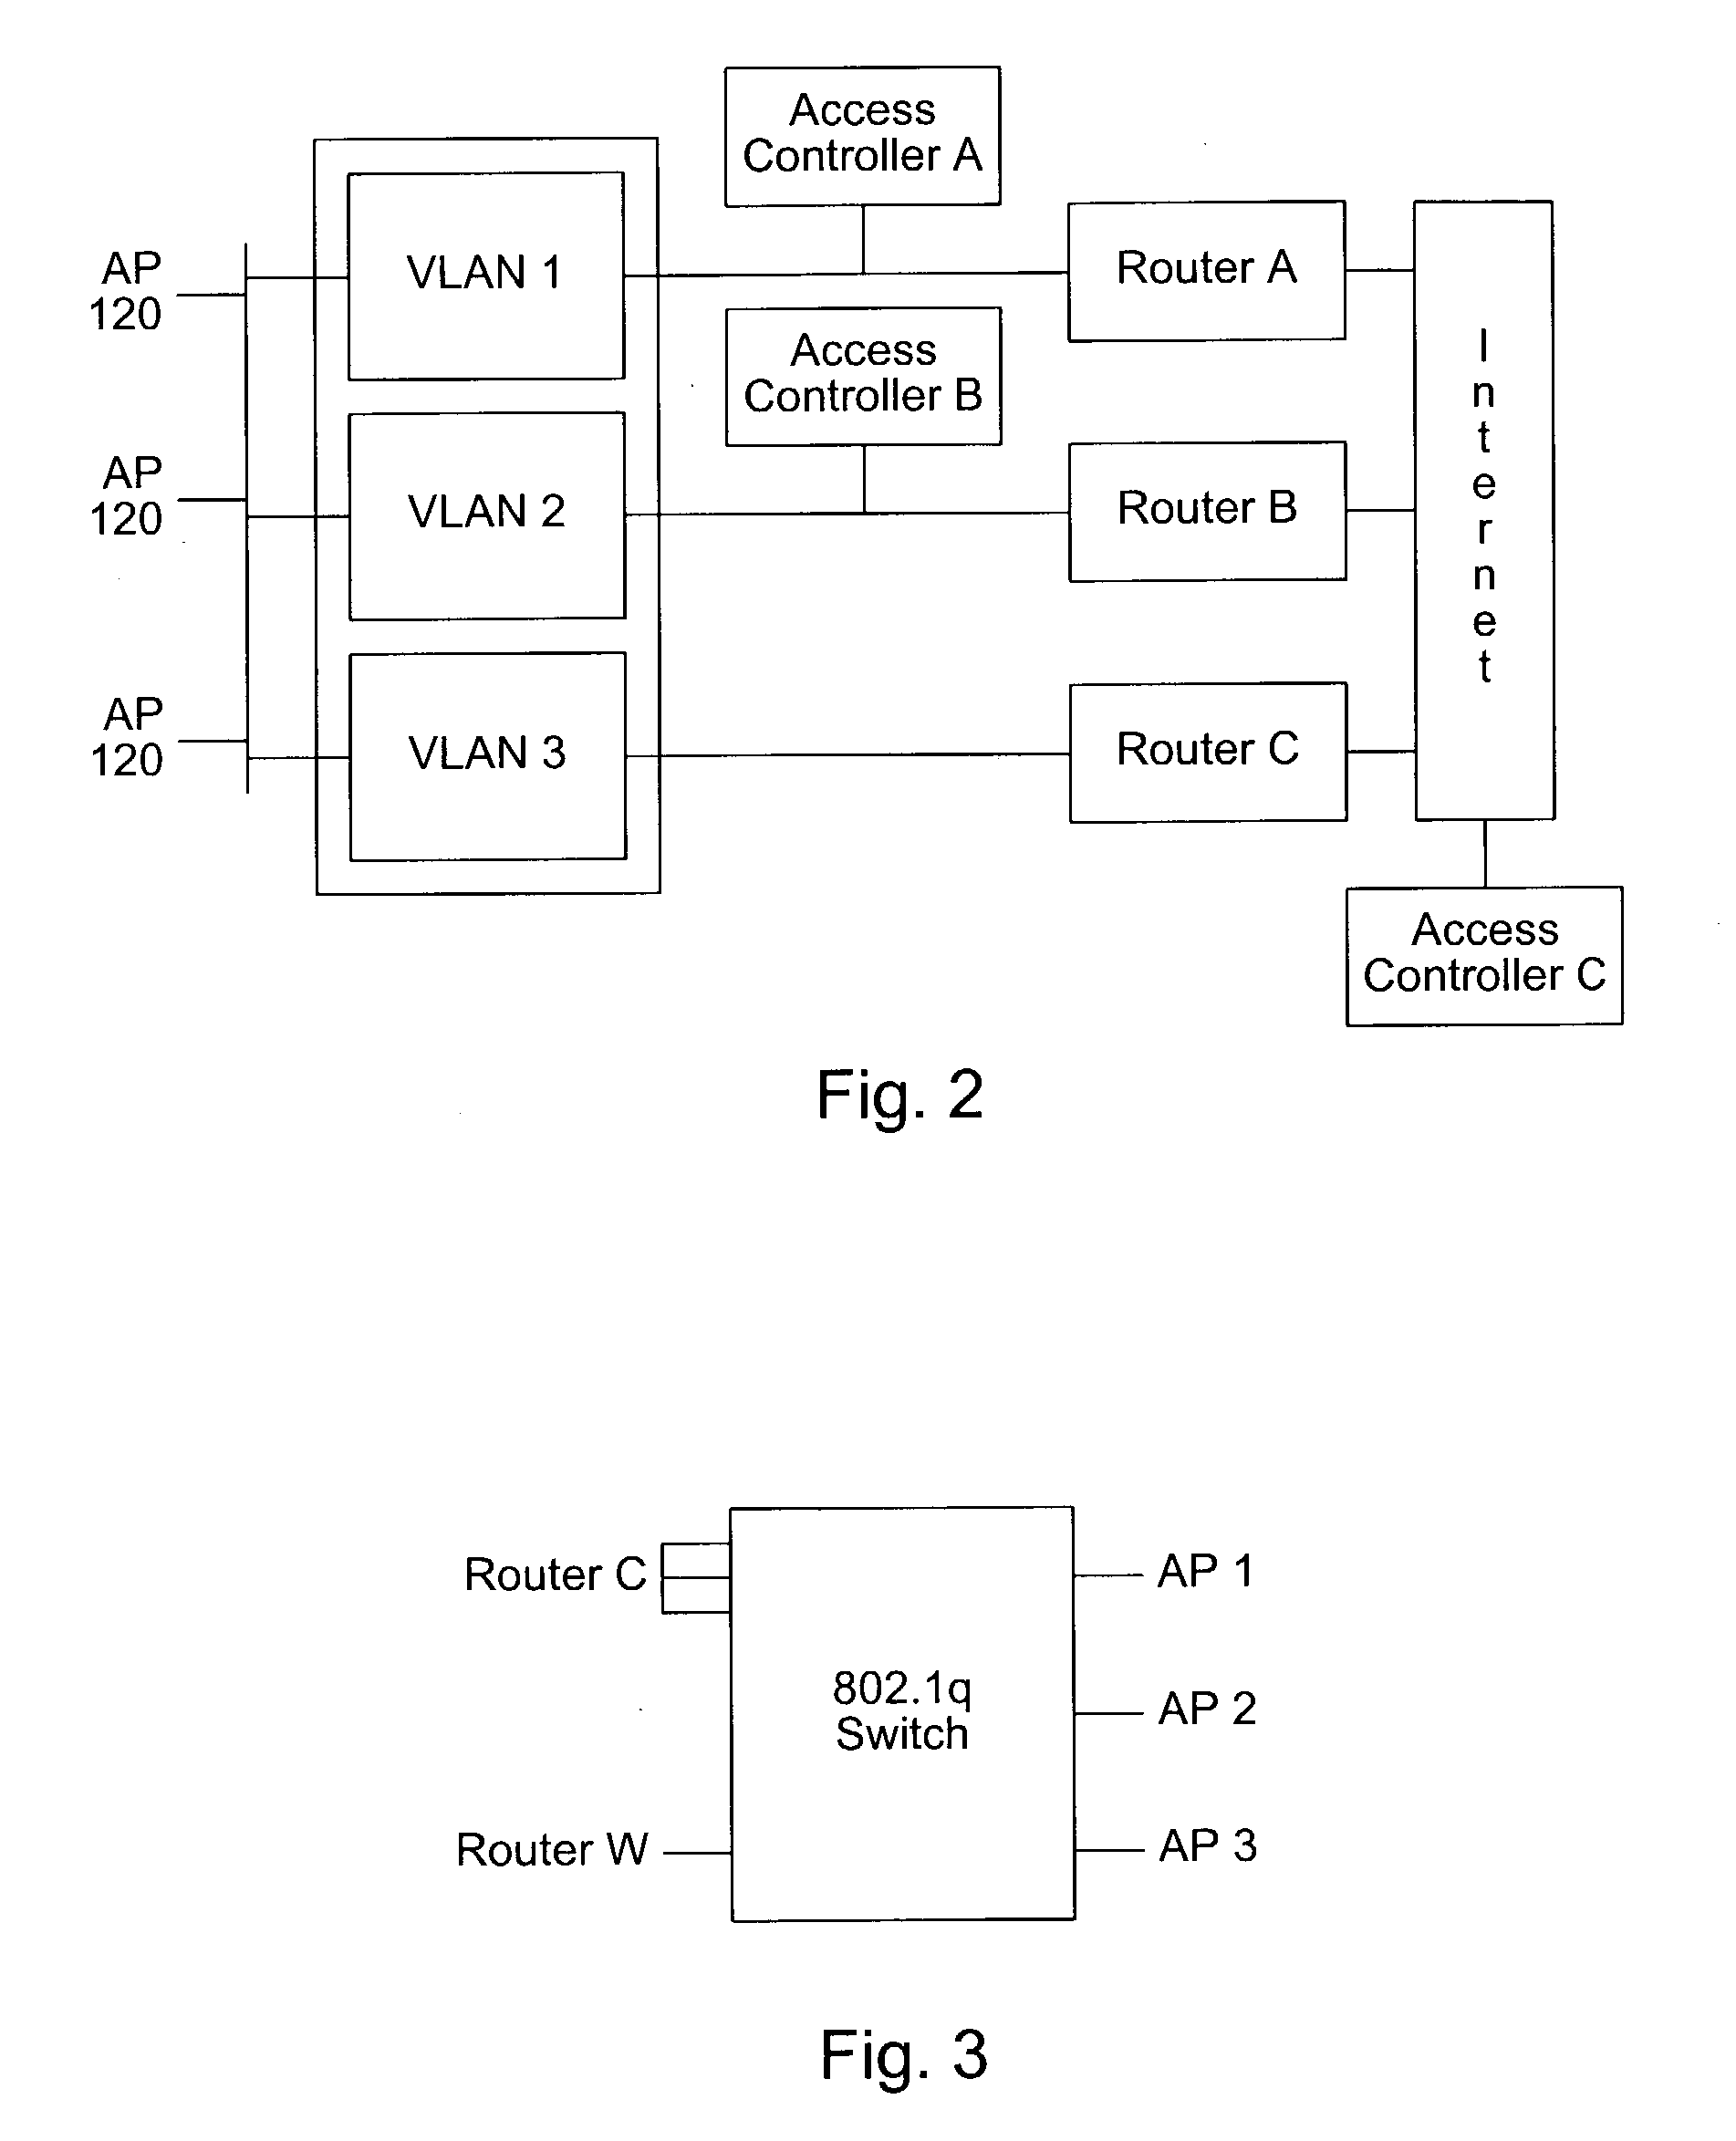 Authorization and authentication of user access to a distributed network communication system with roaming features